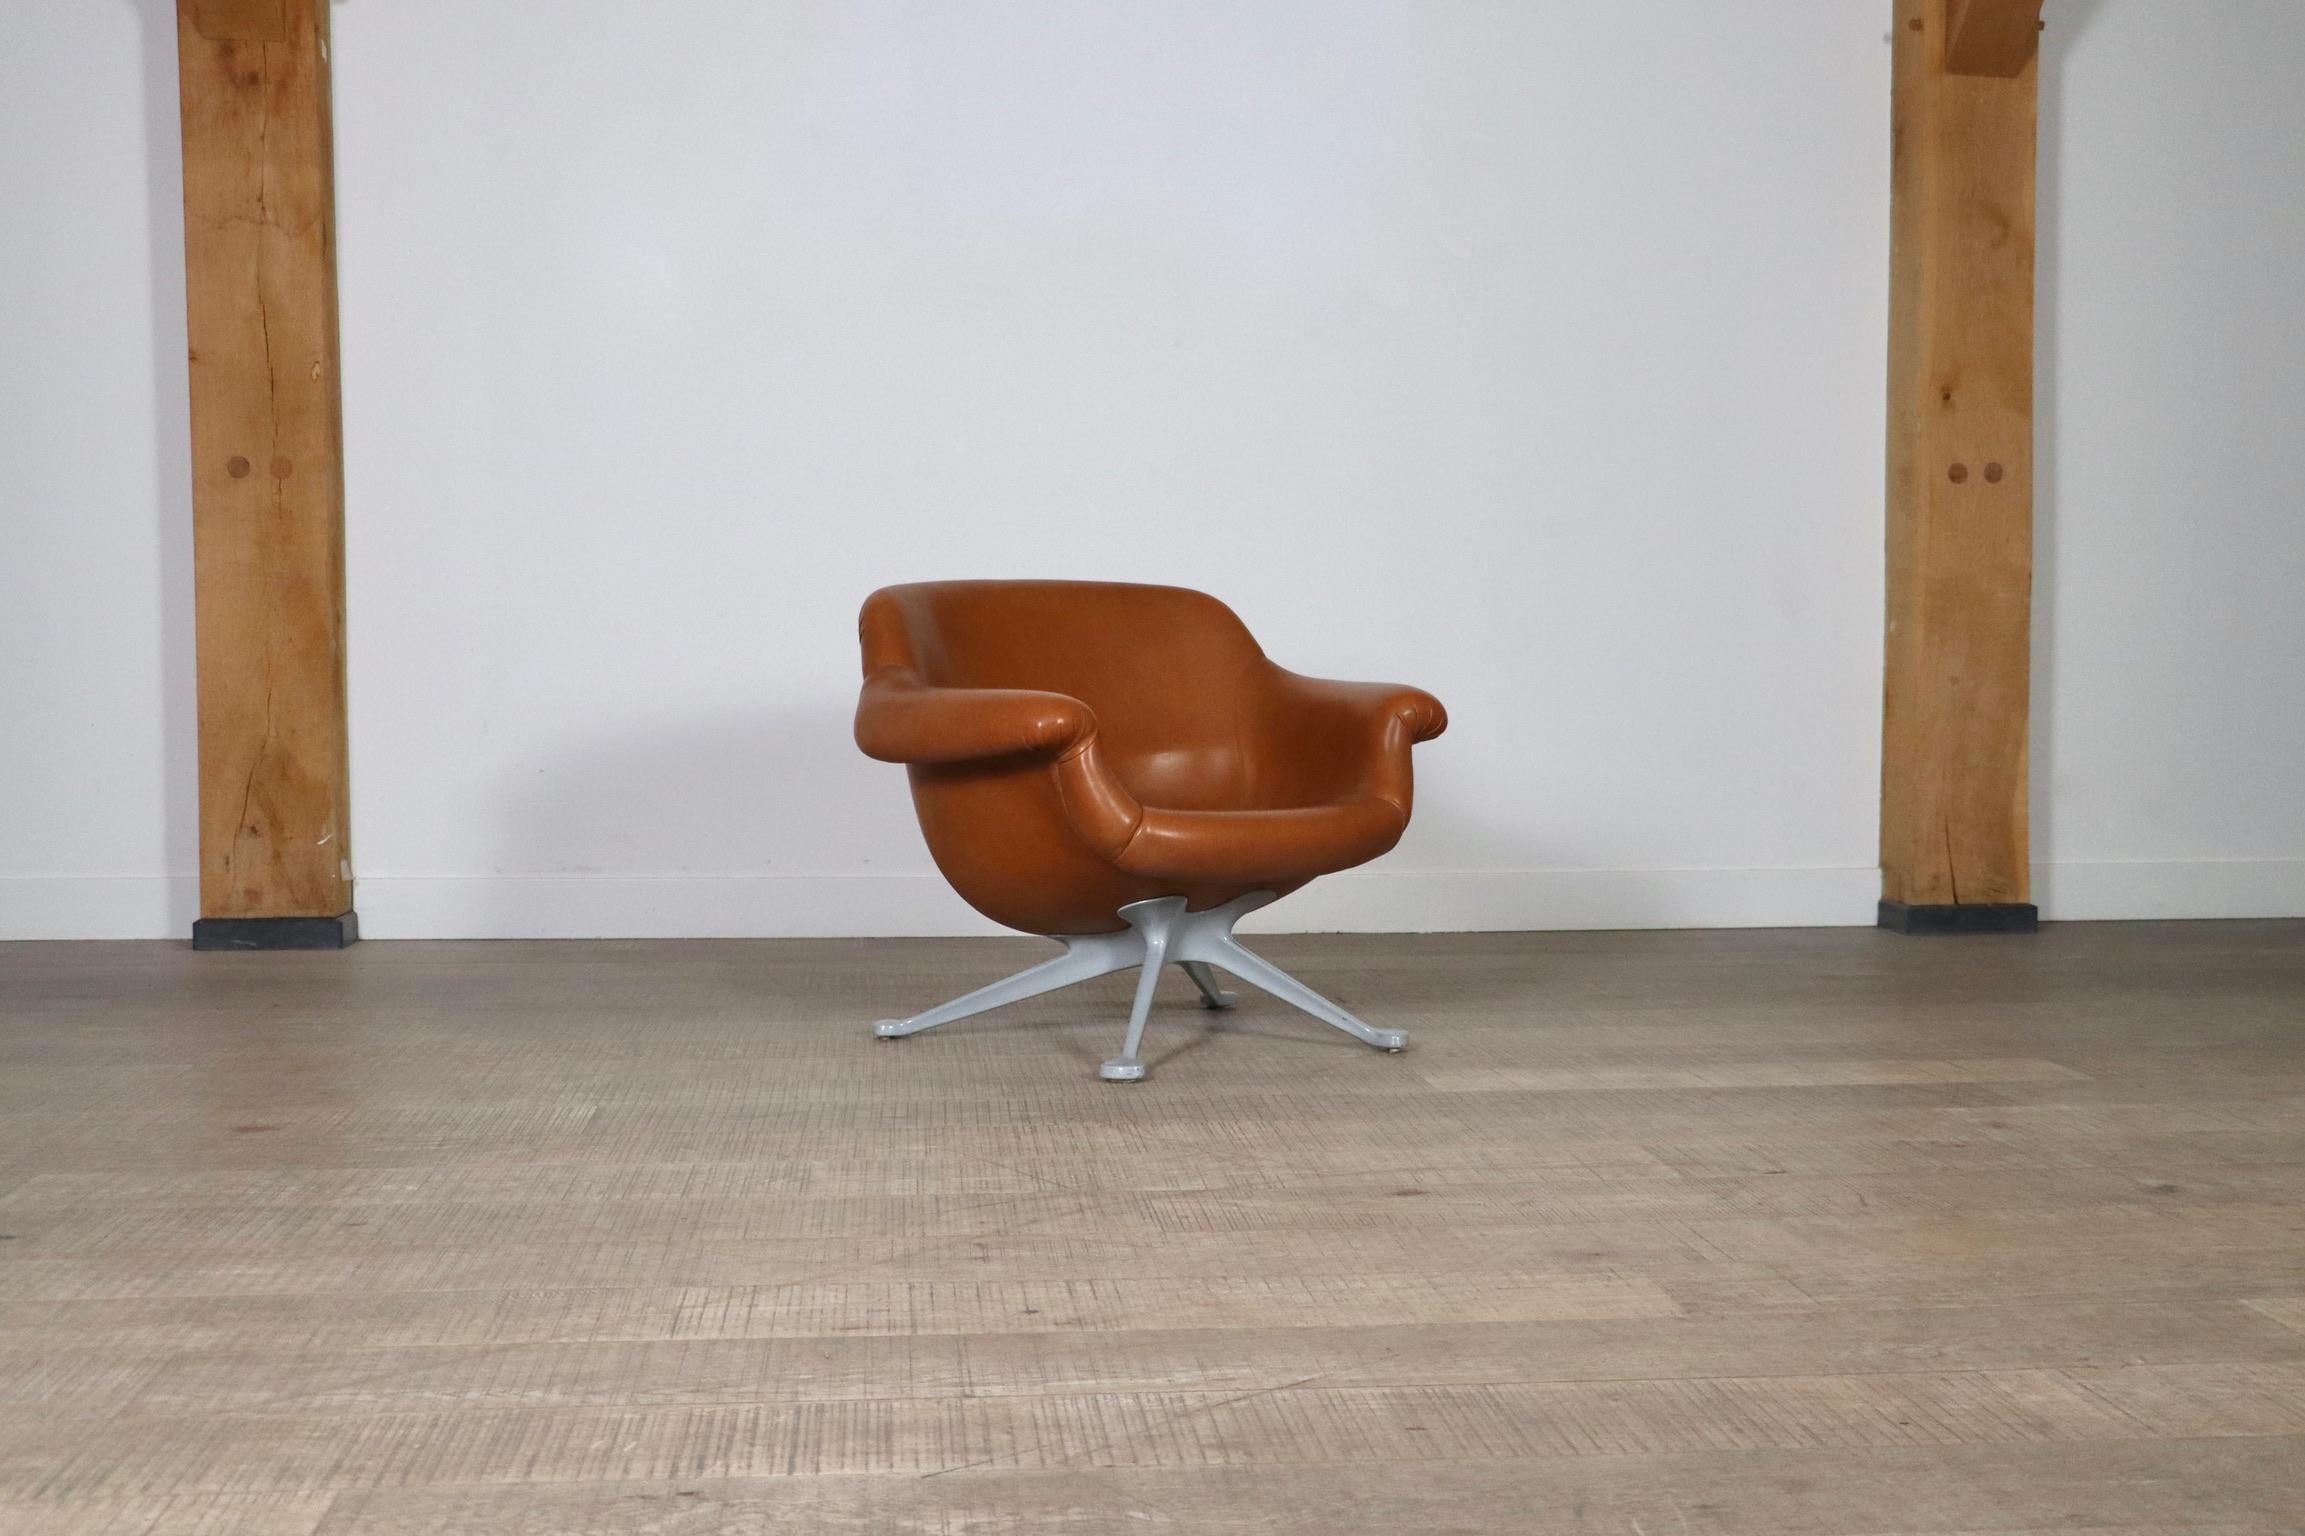 A very rare lounge chair designed by Angelo Mangiarotti, manufactured by Cassina in Italy, circa 1960. This model, nr. 1110, is extremely hard to find and absolutely stunning design. The chair has a high quality grey aluminium base and is